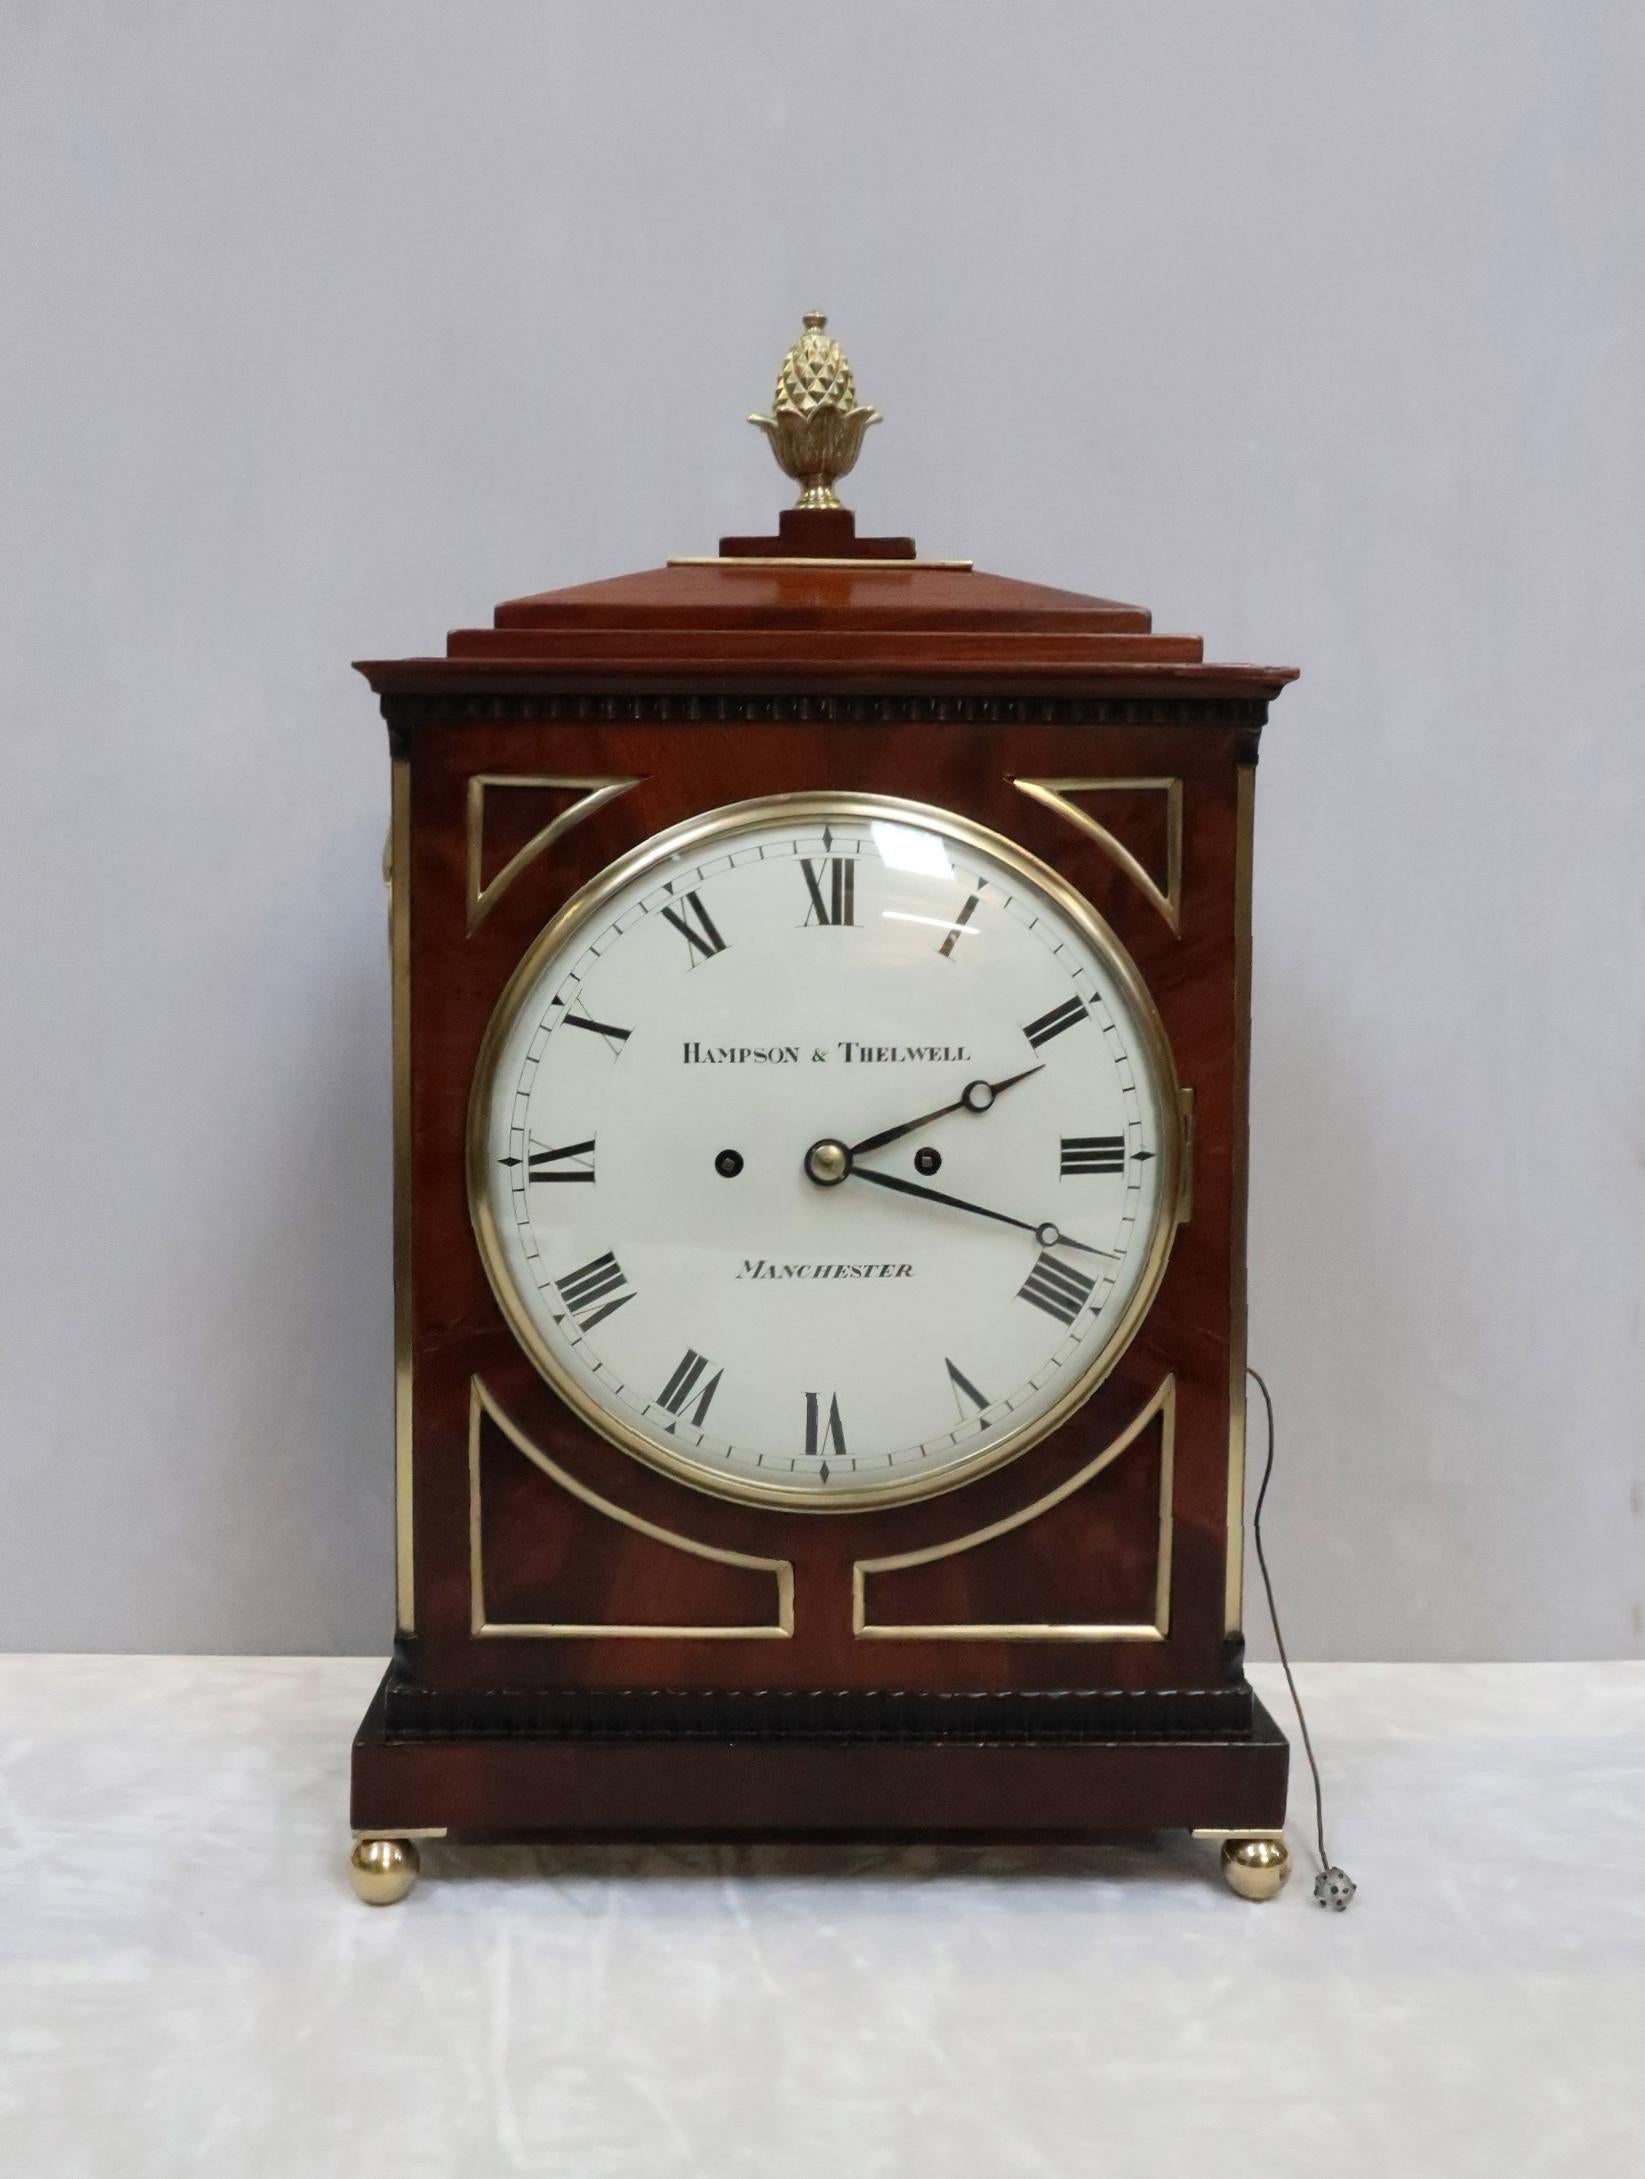 A very good quality English George III figured mahogany chamfer top bracket or table clock with ebony mouldings, inset corner panels and brass moulded edges to the front of the case stood on brass ball feet finished with a brass pineapple finial to